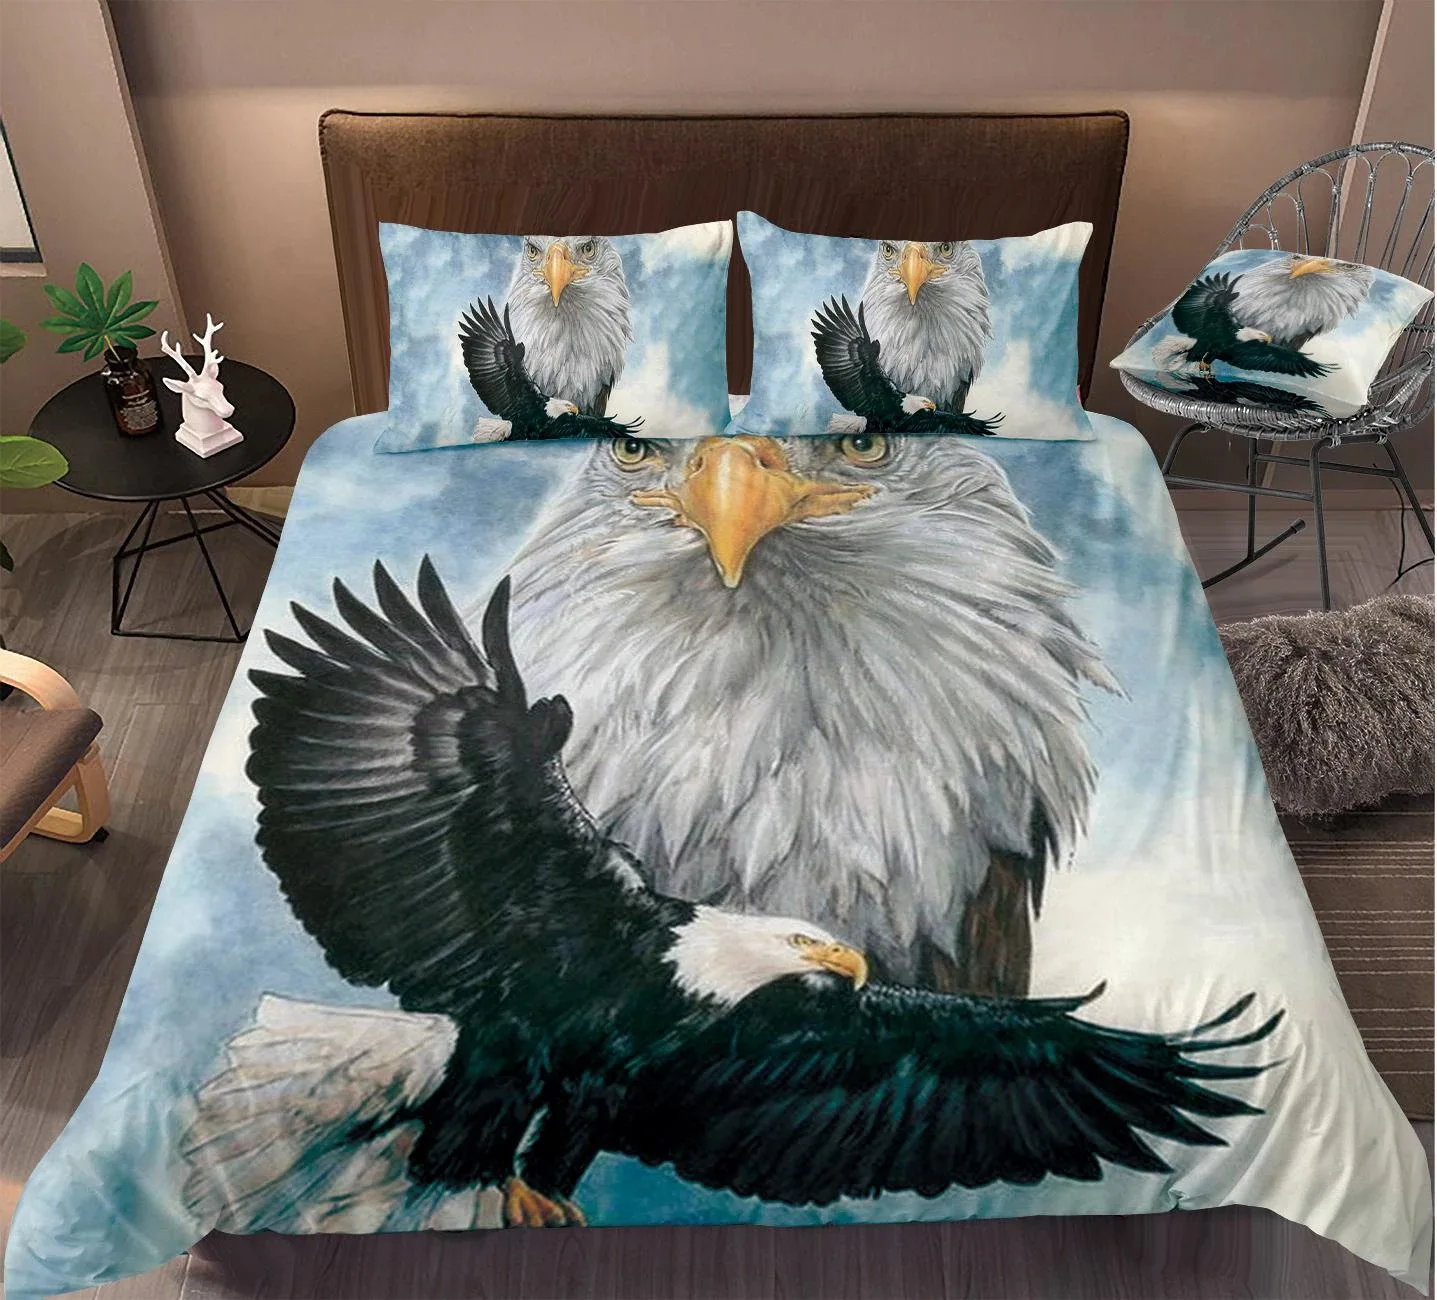 Eagle Duvet Cover Set King/Queen Size,cute Grey and White Eagle Soars In The Sky Pattern Print Bedding Set for Kids Teens Adults images - 6